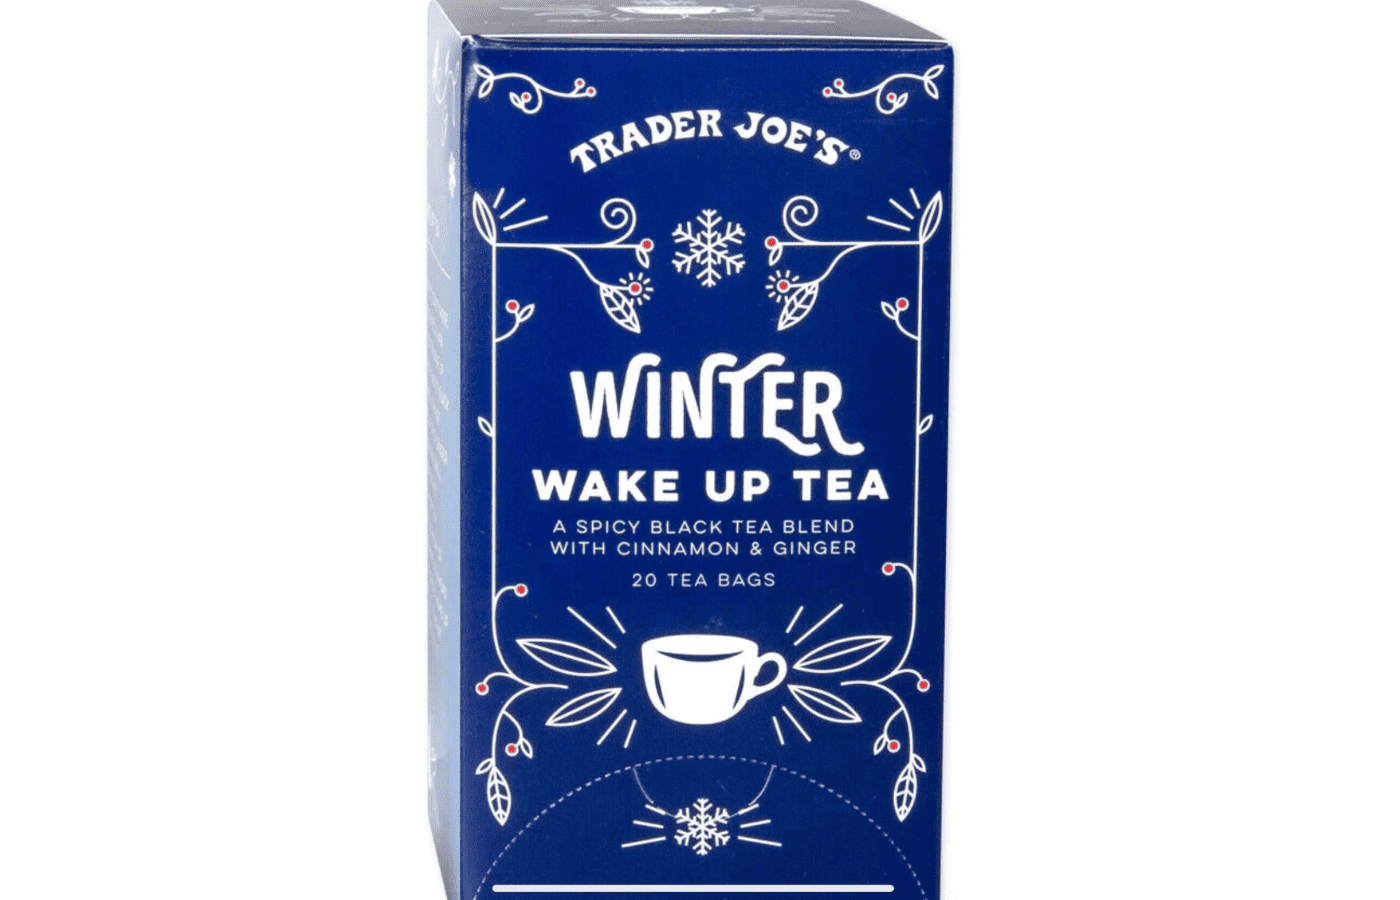 Does Trader Joe’s winter wake up tea have caffiene